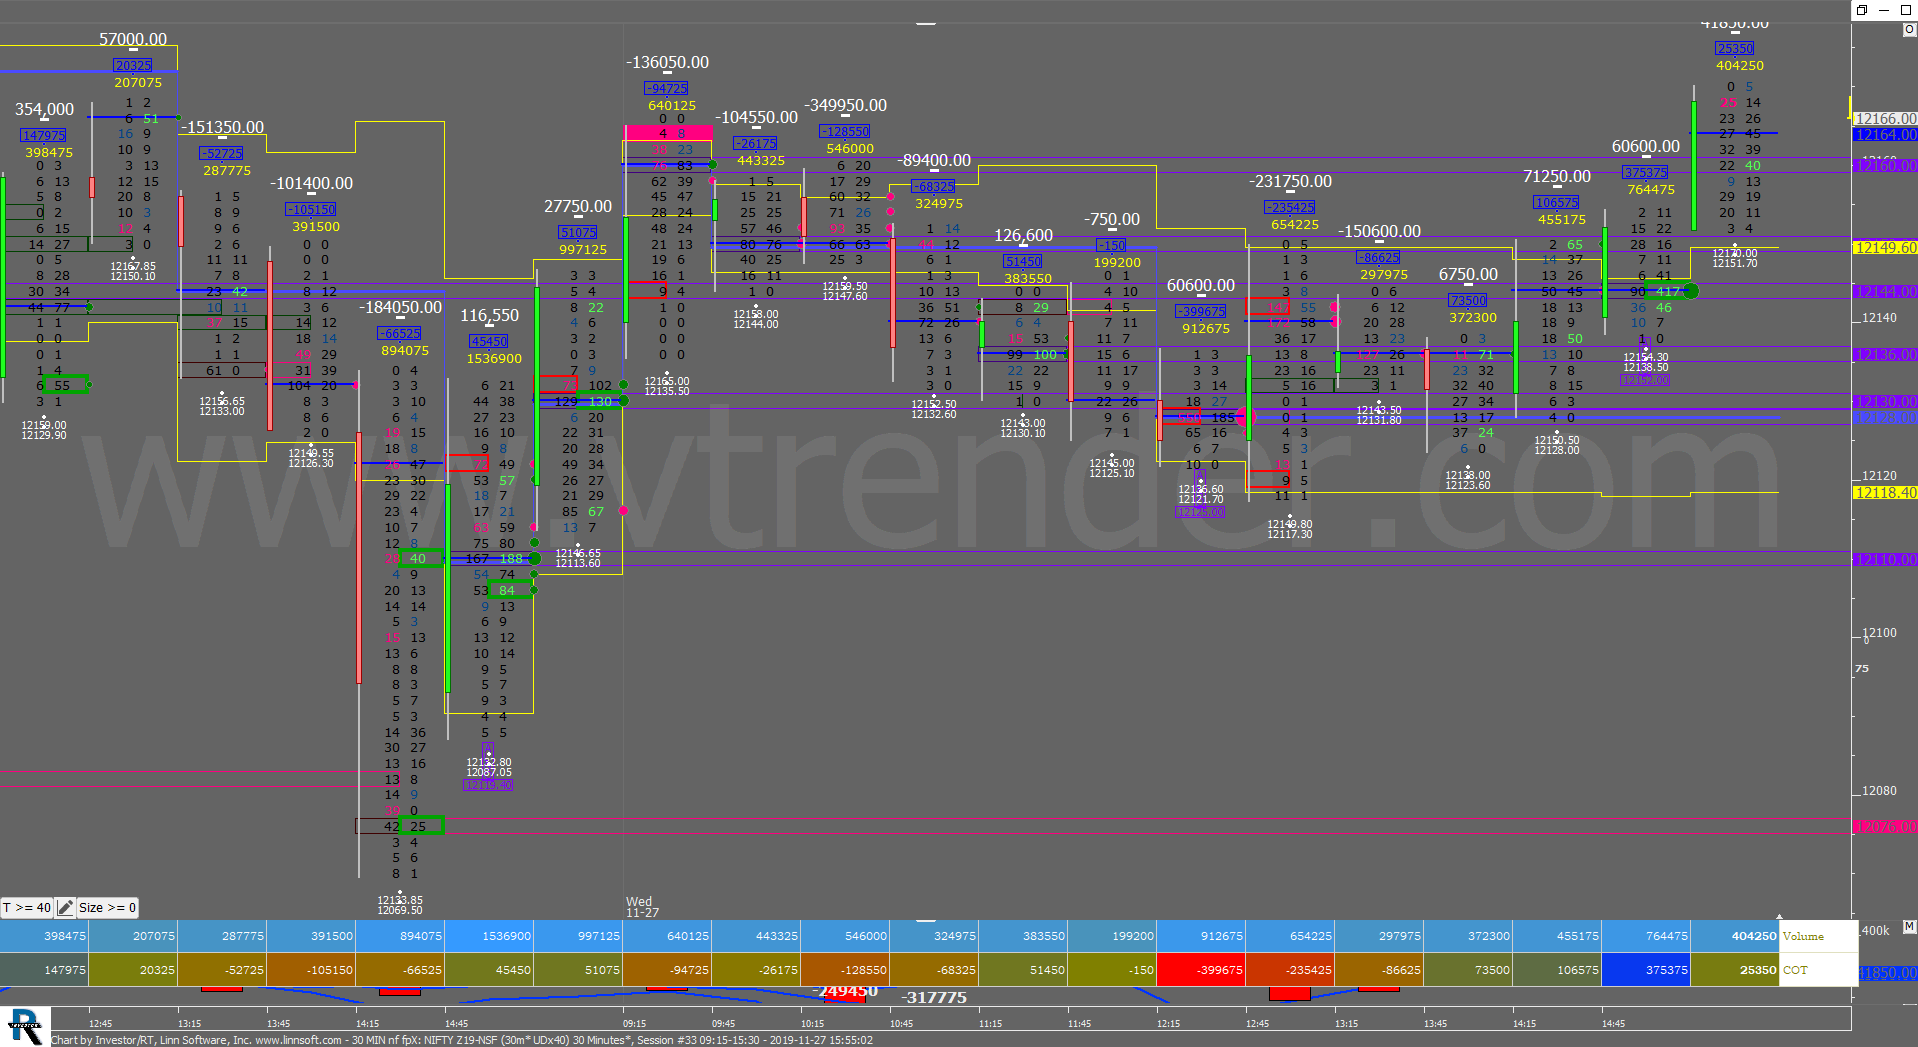 30 Min Nf Fpx Dec 3 Order Flow Charts Dated 27Th Nov Banknifty Futures, Day Trading, Intraday Trading, Intraday Trading Strategies, Nifty Futures, Order Flow Analysis, Support And Resistance, Trading Strategies, Volume Profile Trading